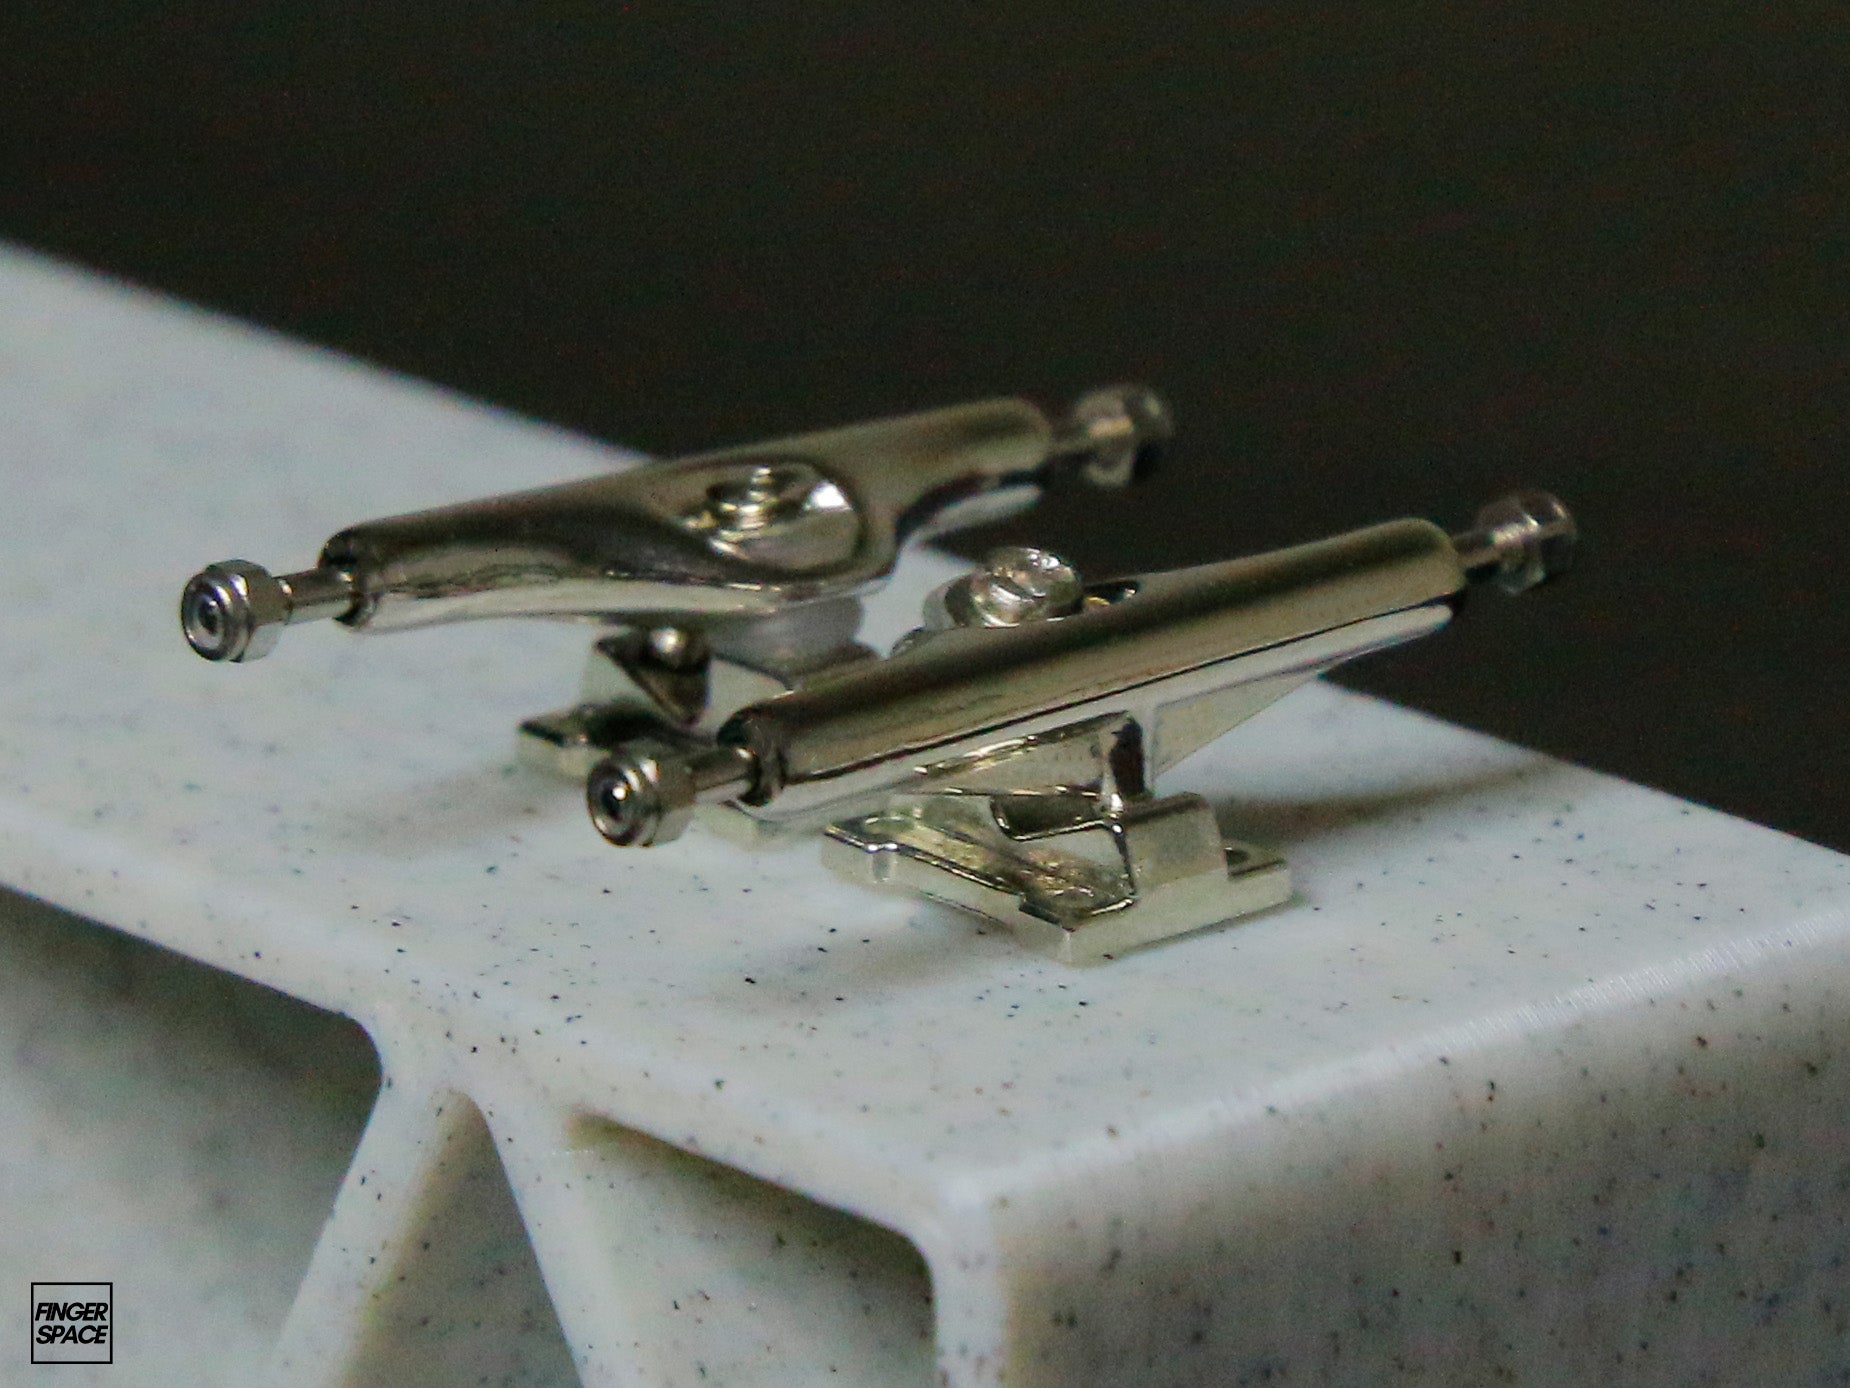 32mm Olympus Pro Fingerboard Trucks - "Silver Eres" Colorway with Inverted Kingpins